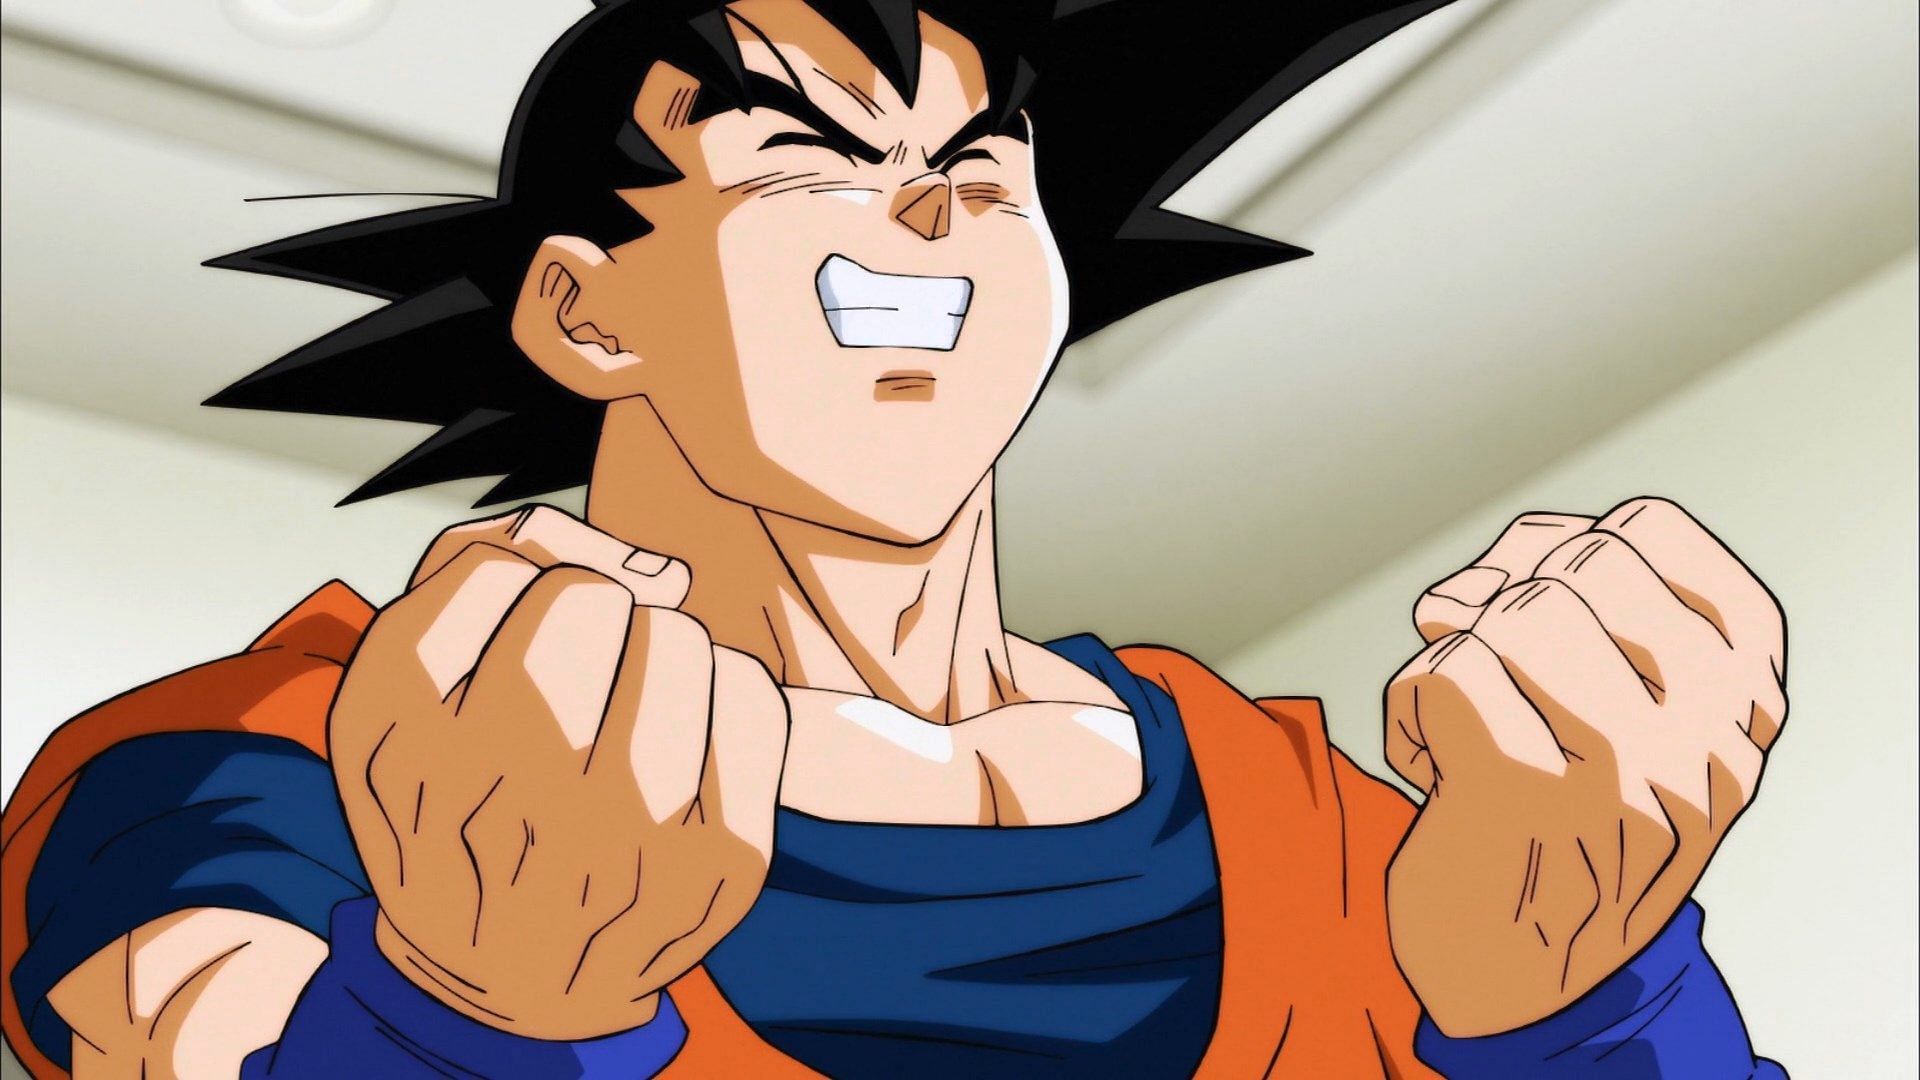 Dragon Ball fans should be excited for what may potentially be an action-packed 2023 (Image via Toei Animation)